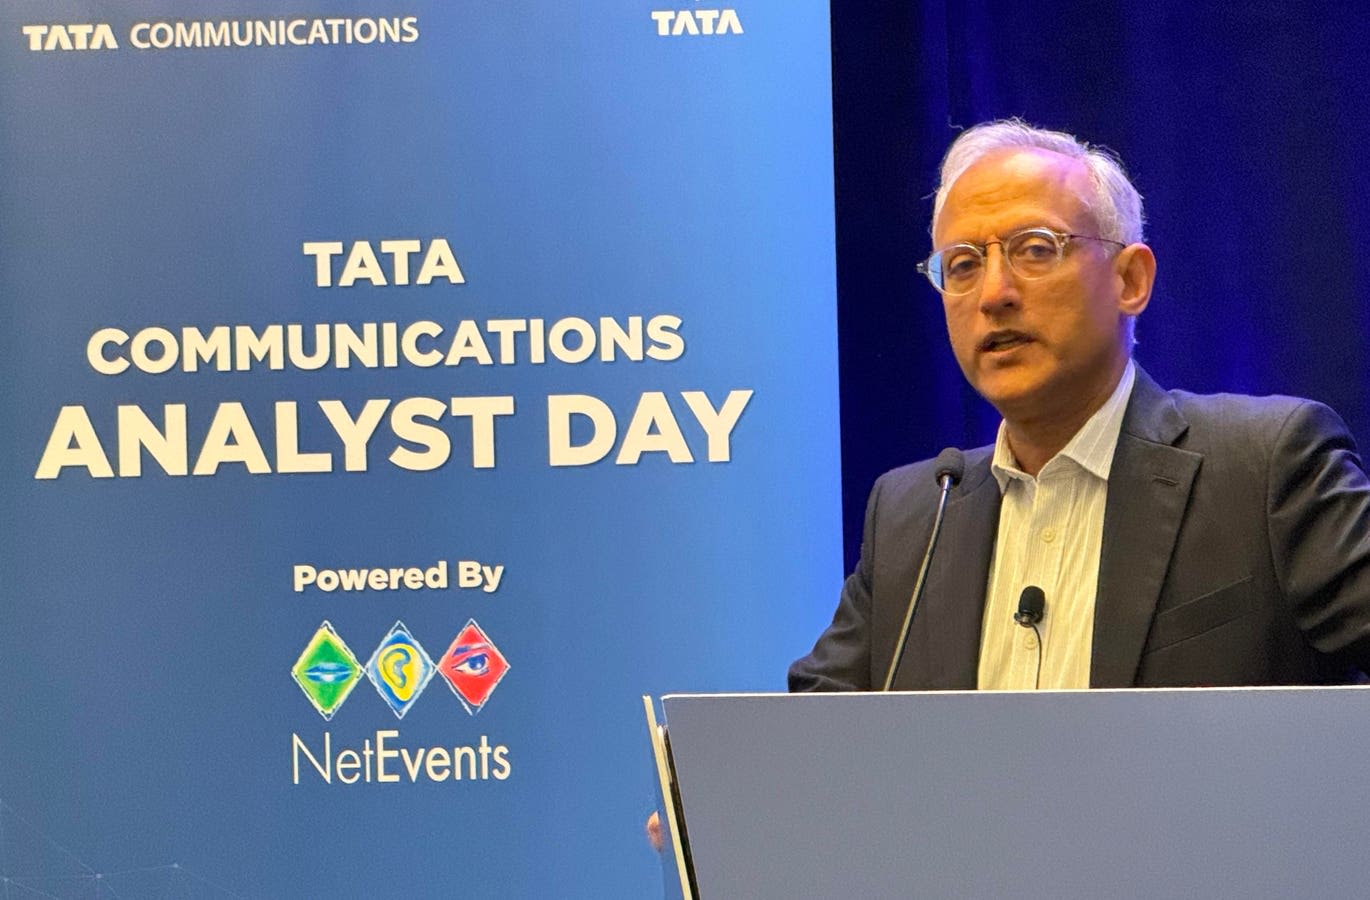 Tata Communications Sets Up For U.S. Growth with Multicloud Strategy